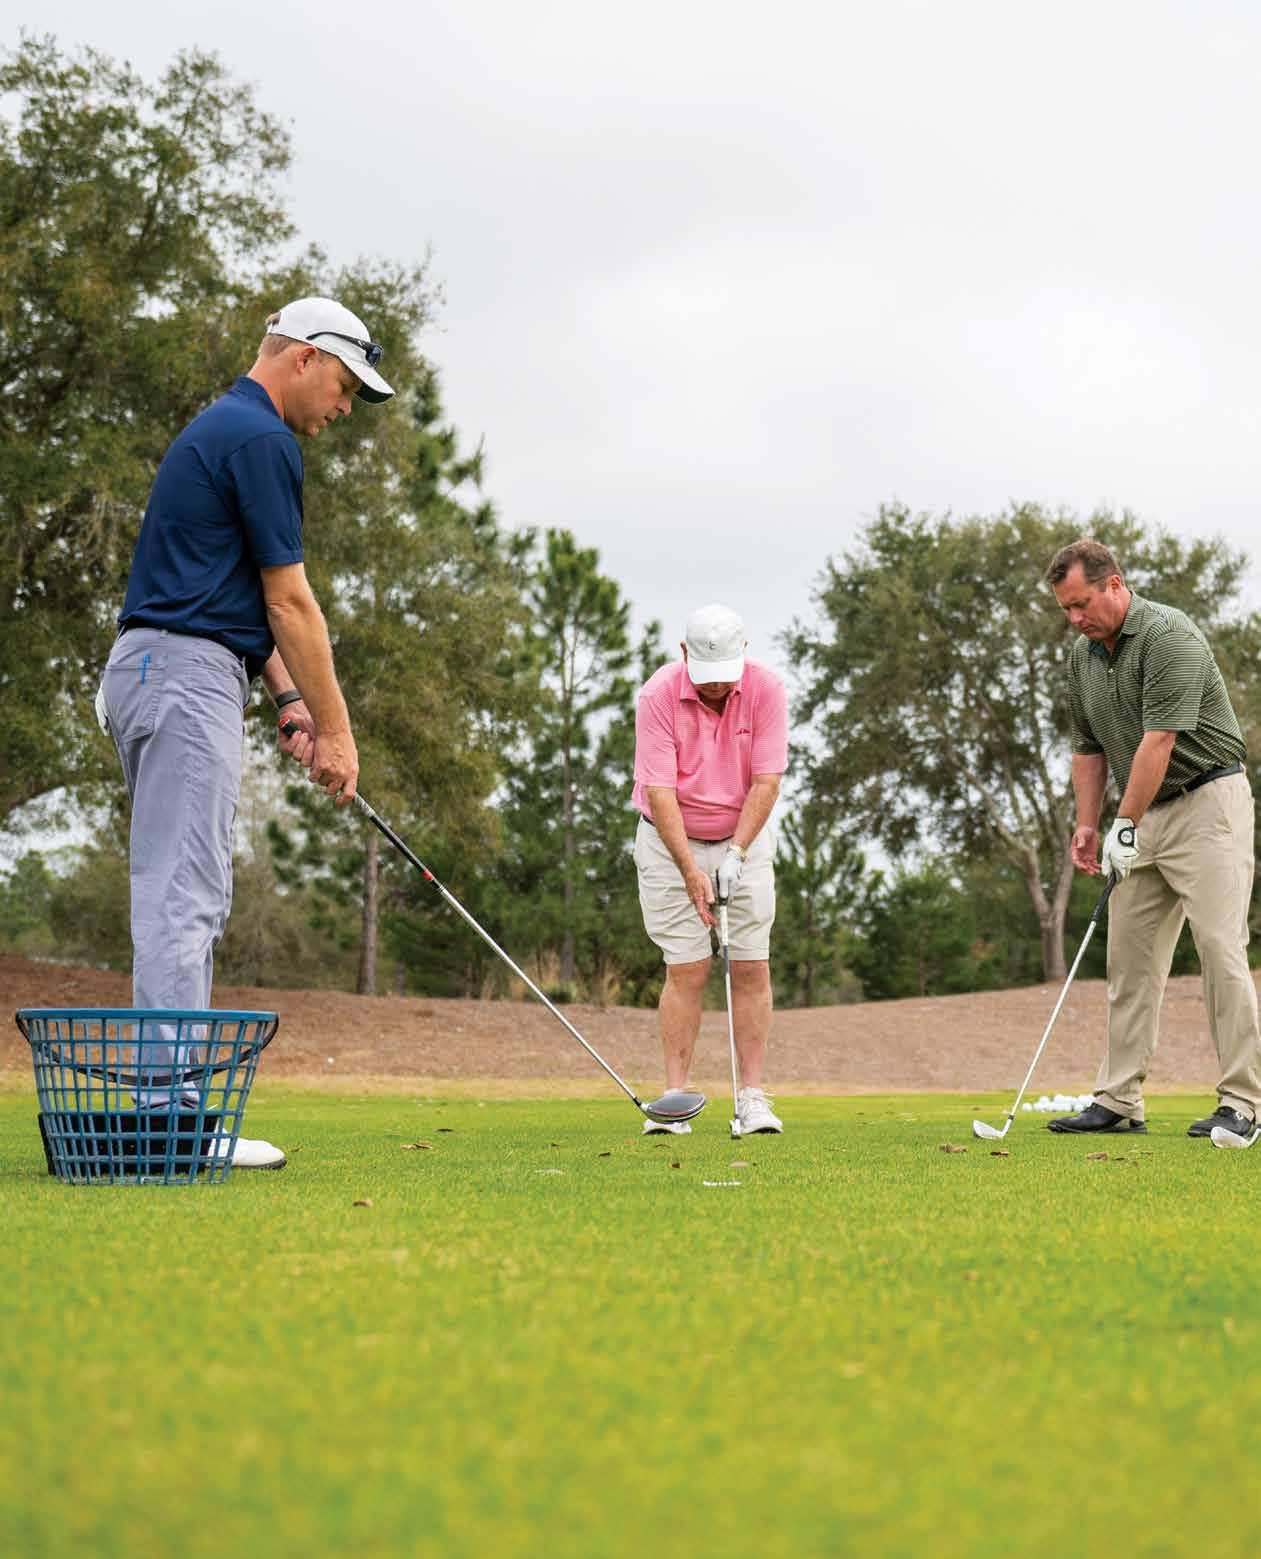 Golf instructor Ben Blalock shows two golfers proper form on the putting green